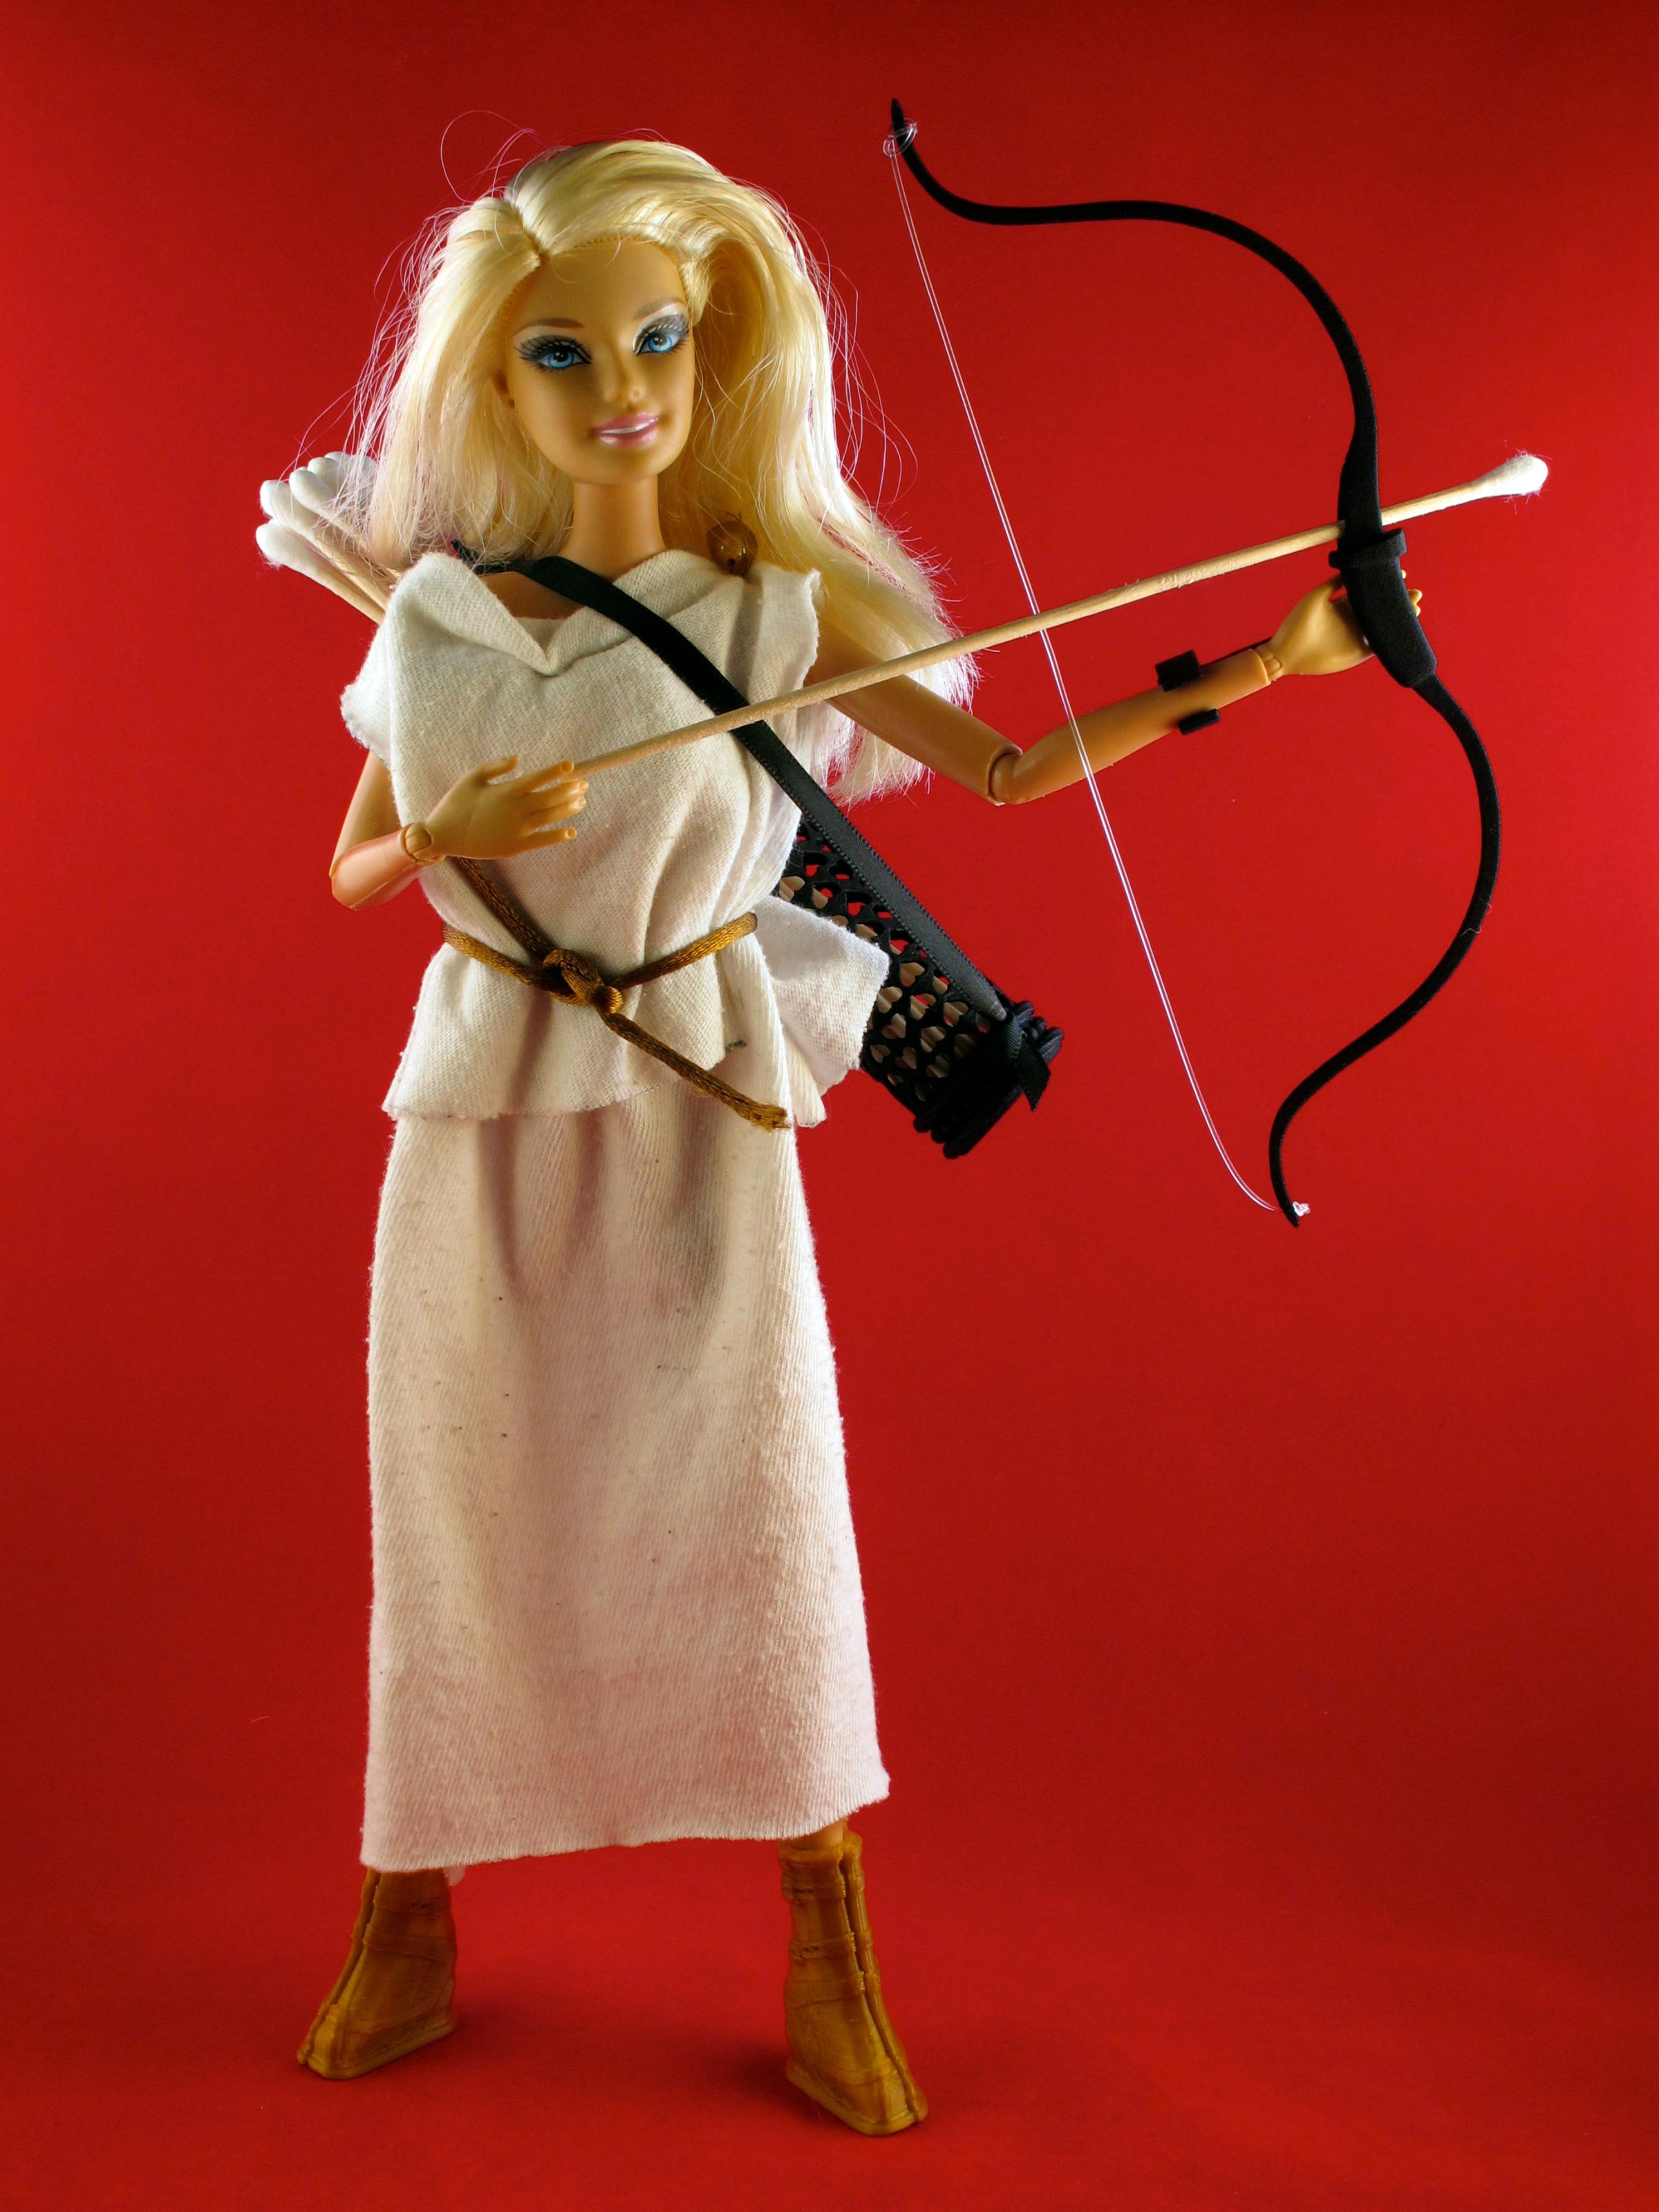 Barbie holds a bow and arrow in her medieval robe.